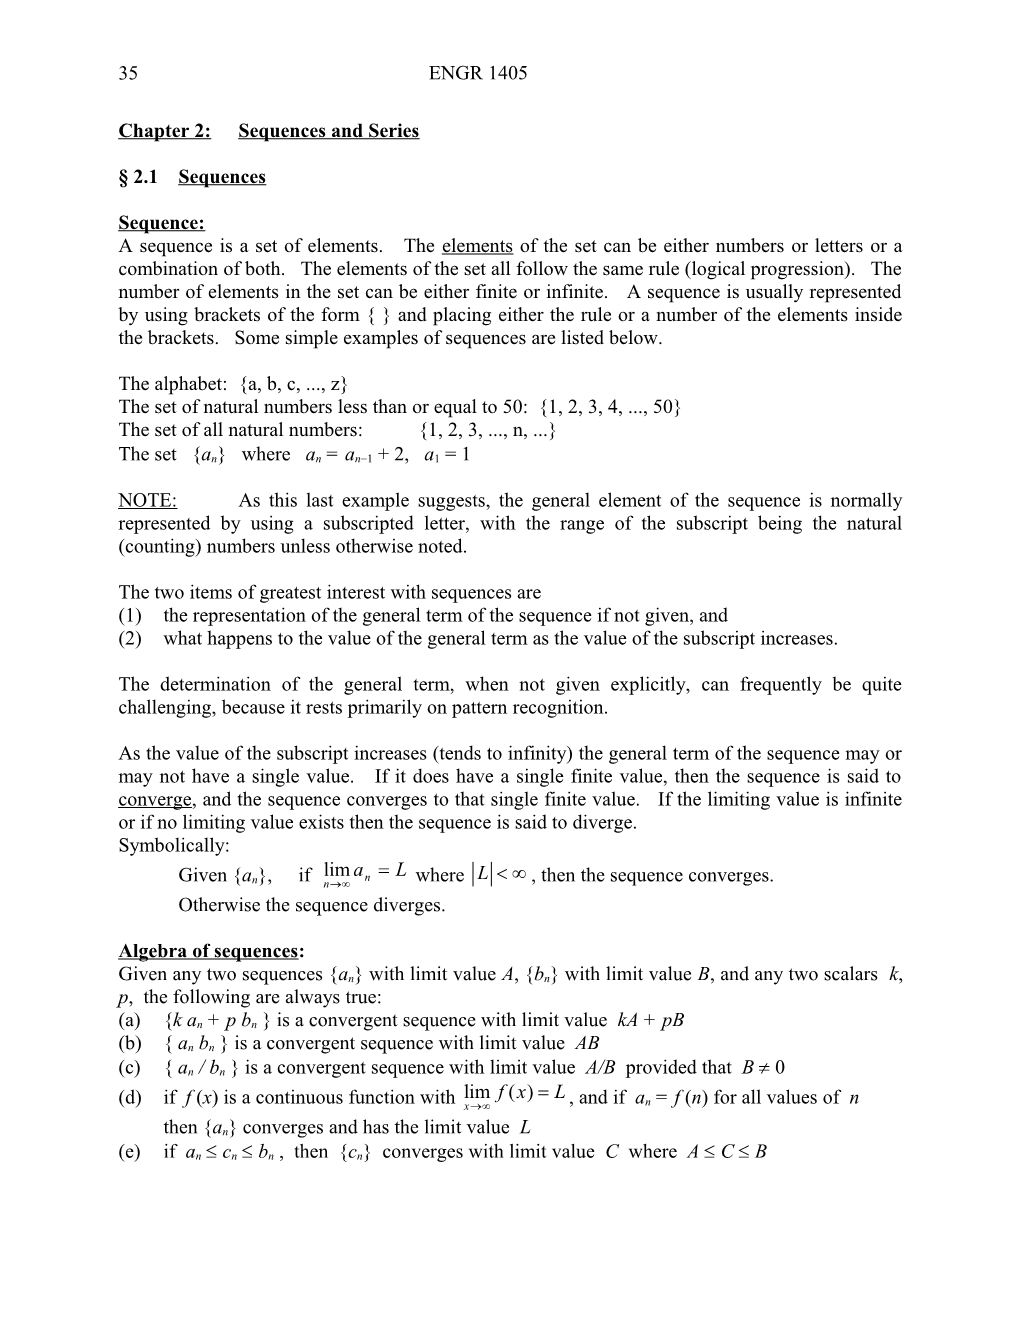 Chapter 2: Sequences and Series